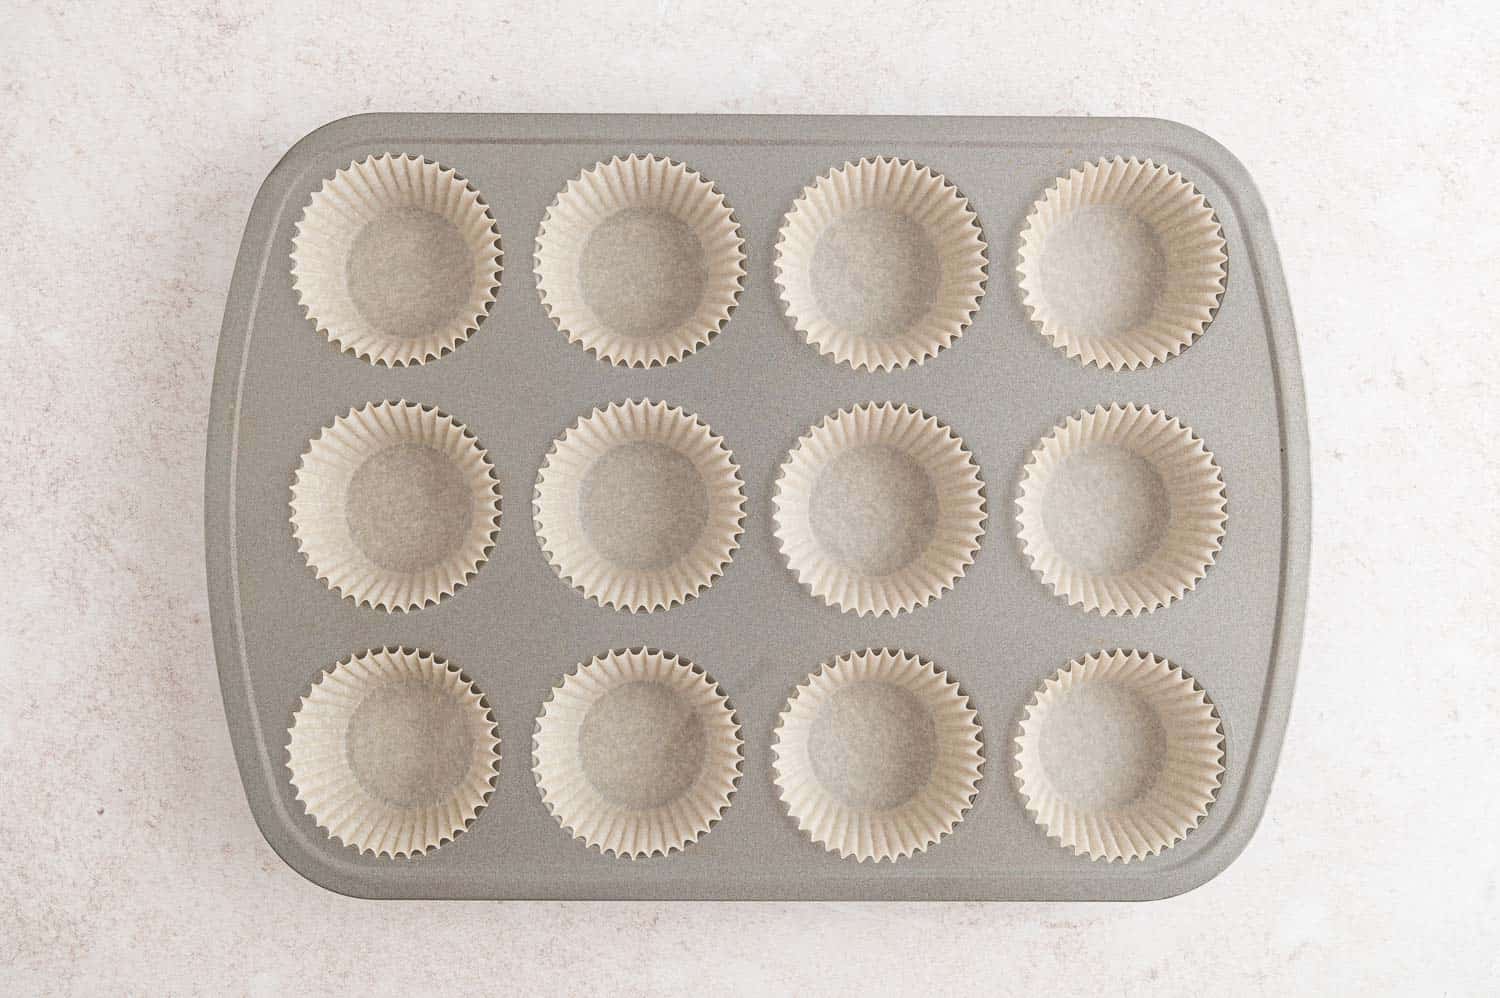 Lined muffin pan.